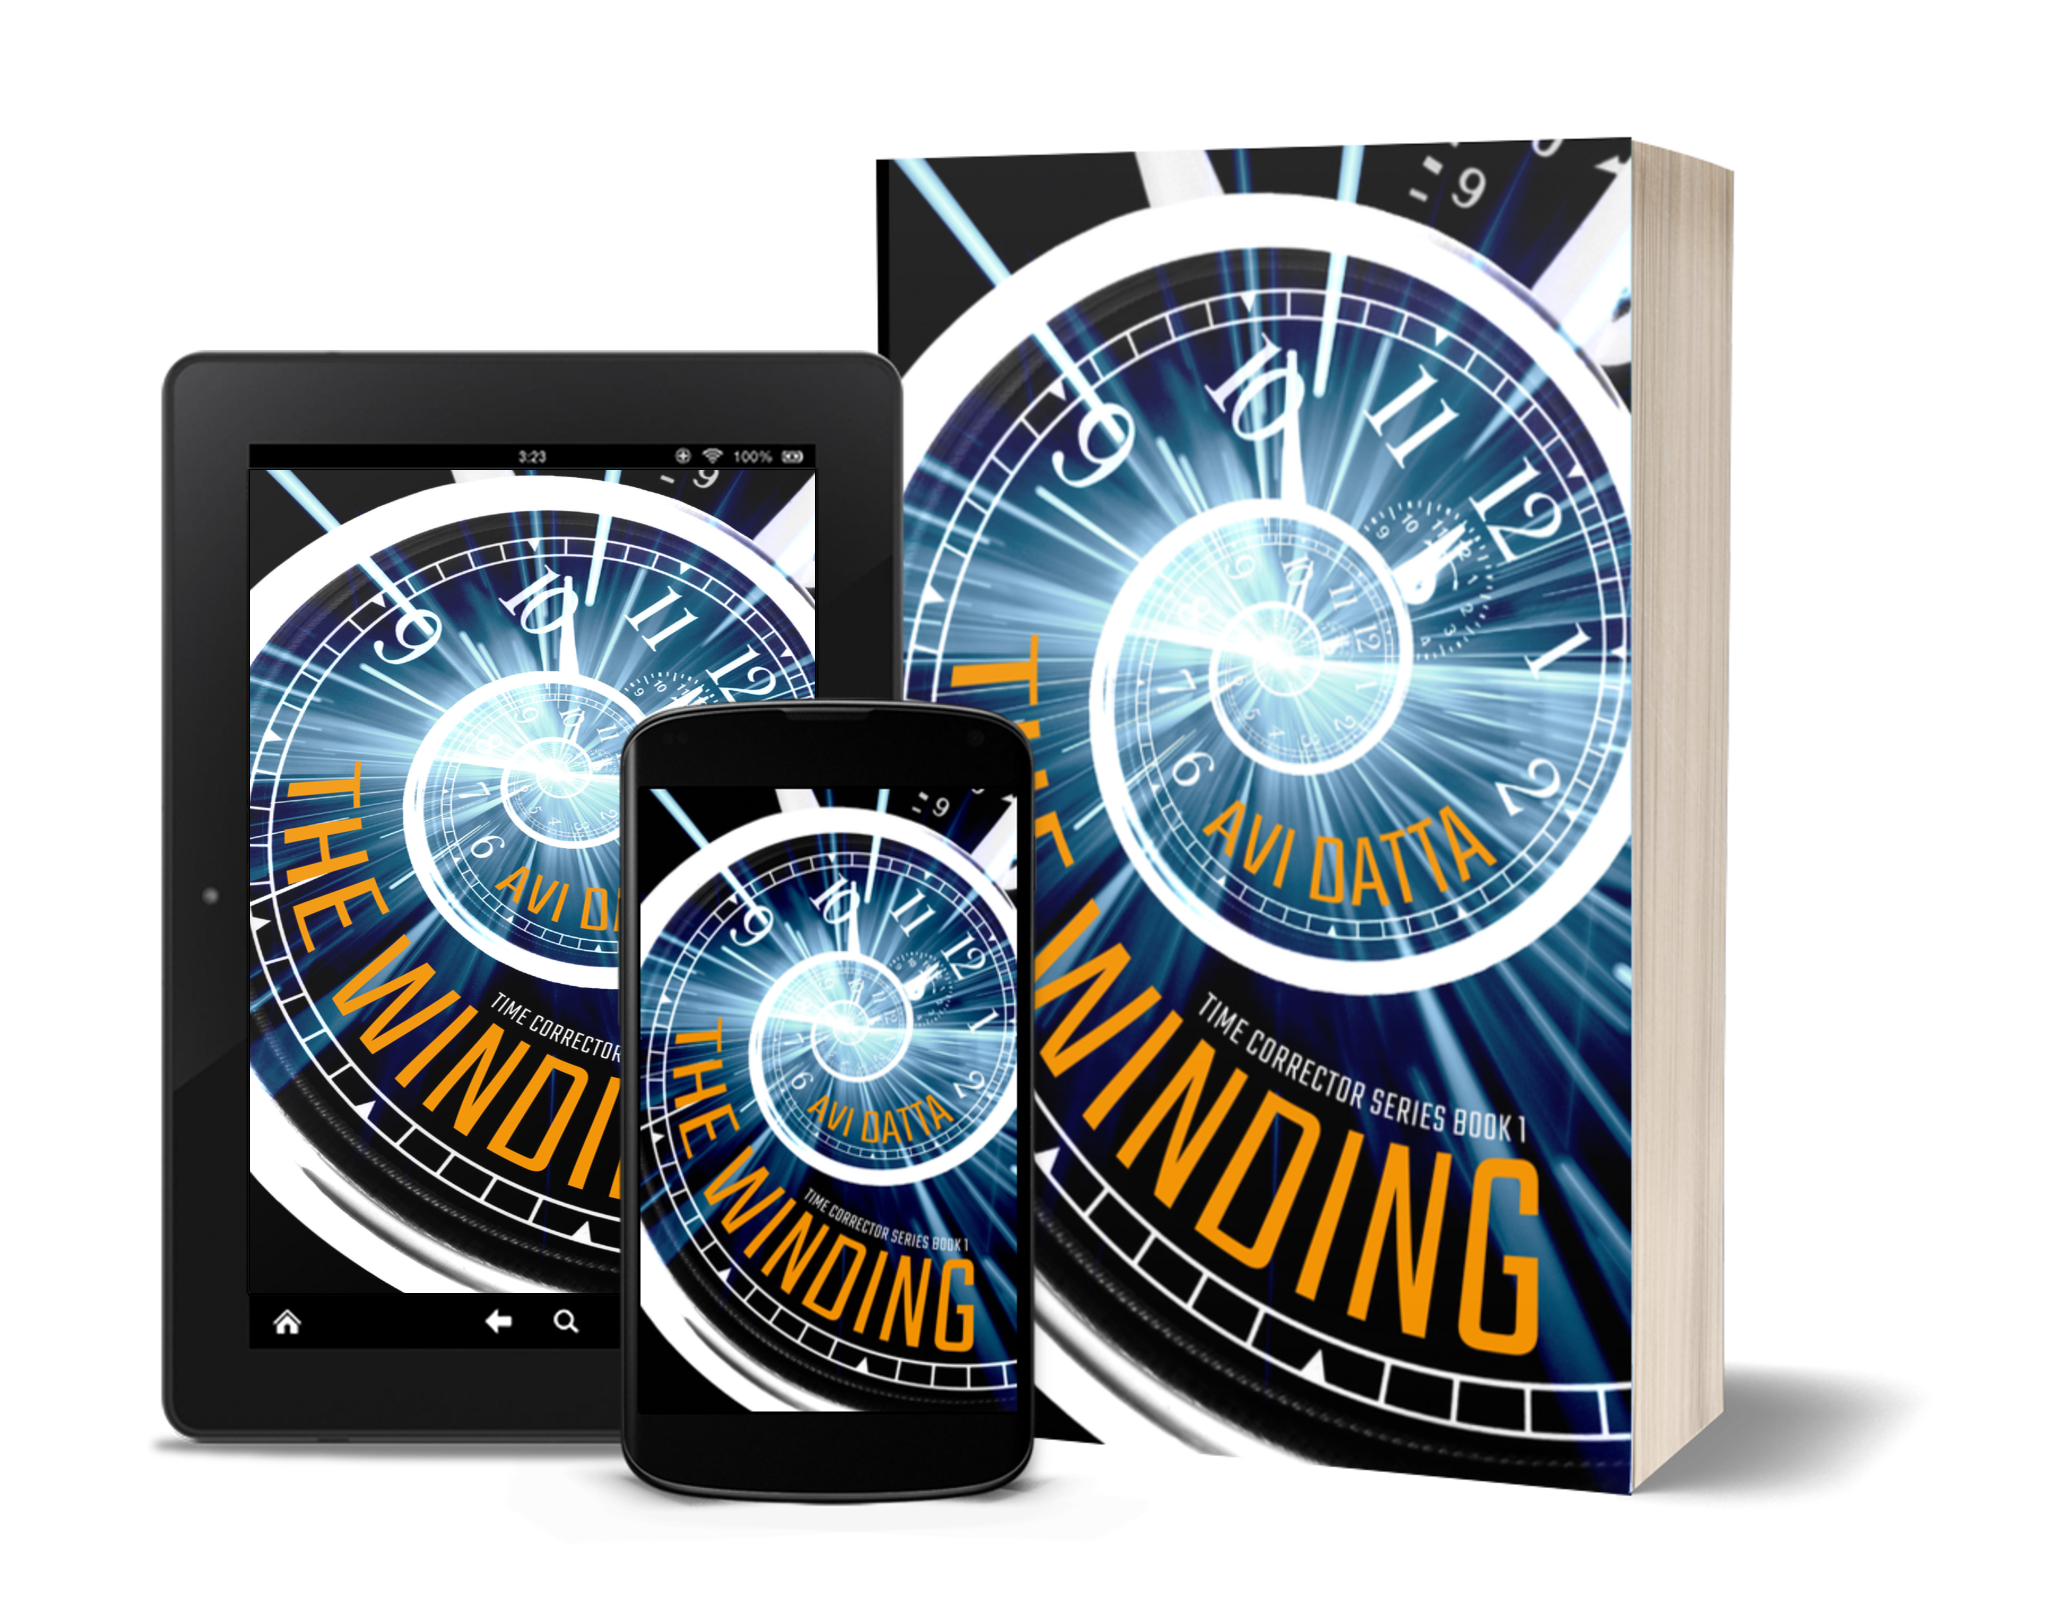 Fantasy Writer and Scholar Debuts “The Winding,” First in a Trilogy of Time Traveling Sci-Fi Novels Exploring Race, Class, Politics, and the Nature of Love